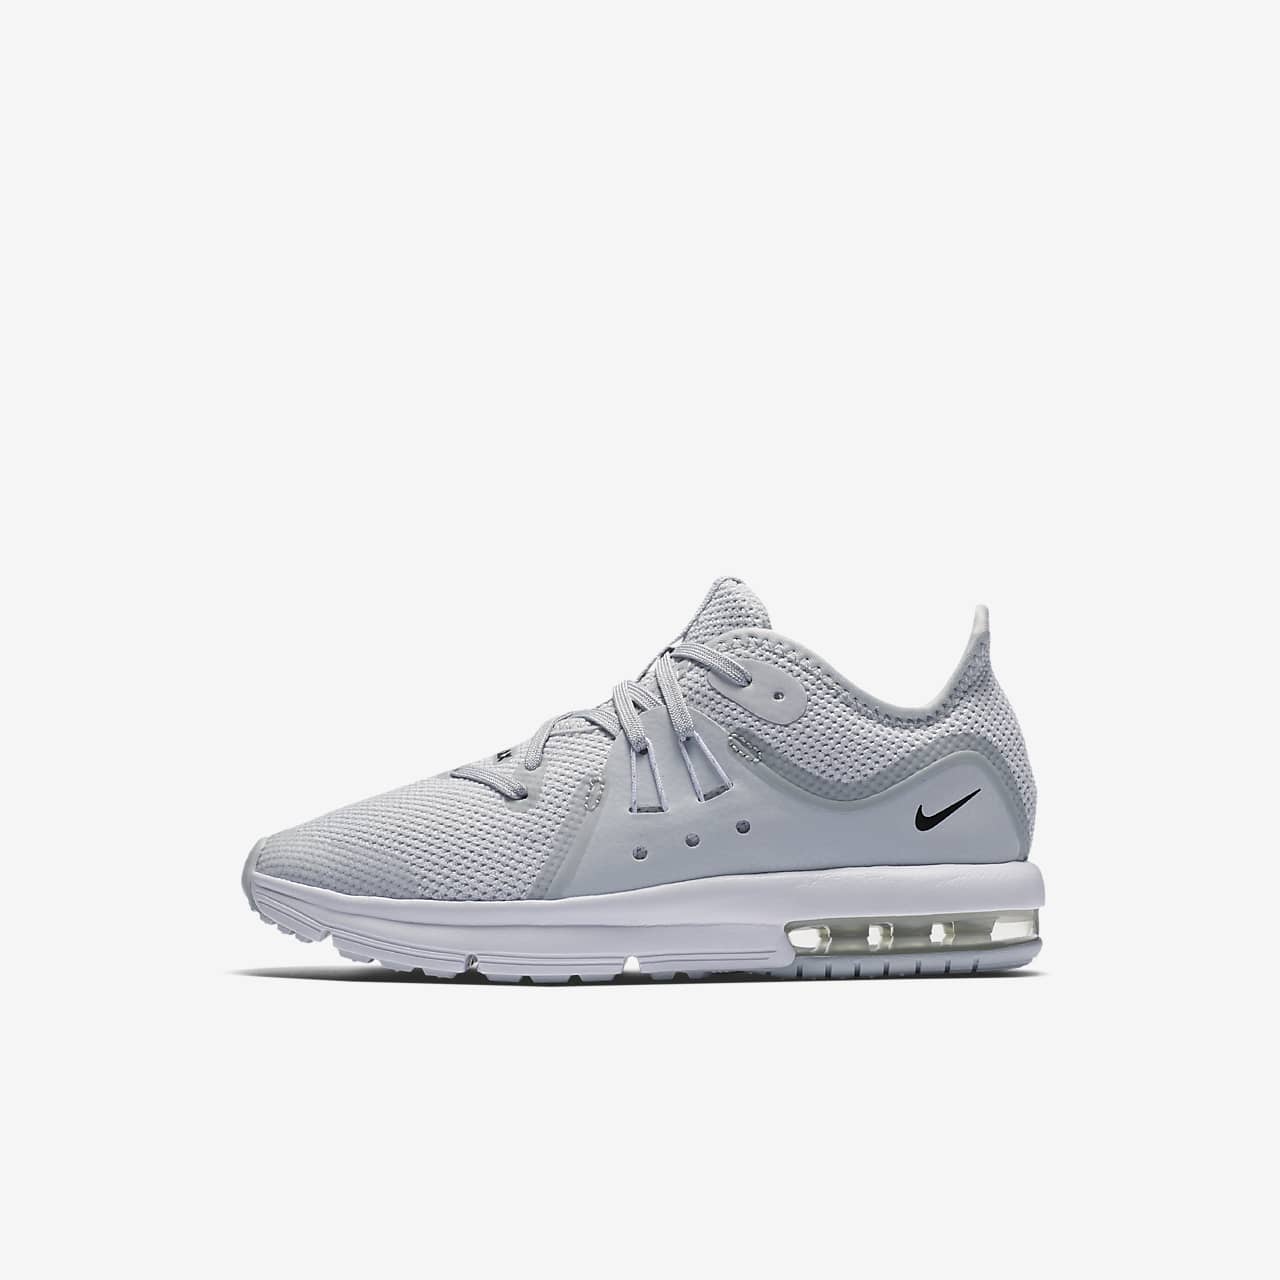 Nike Air Max Sequent 3 (PS) 幼童运动童鞋